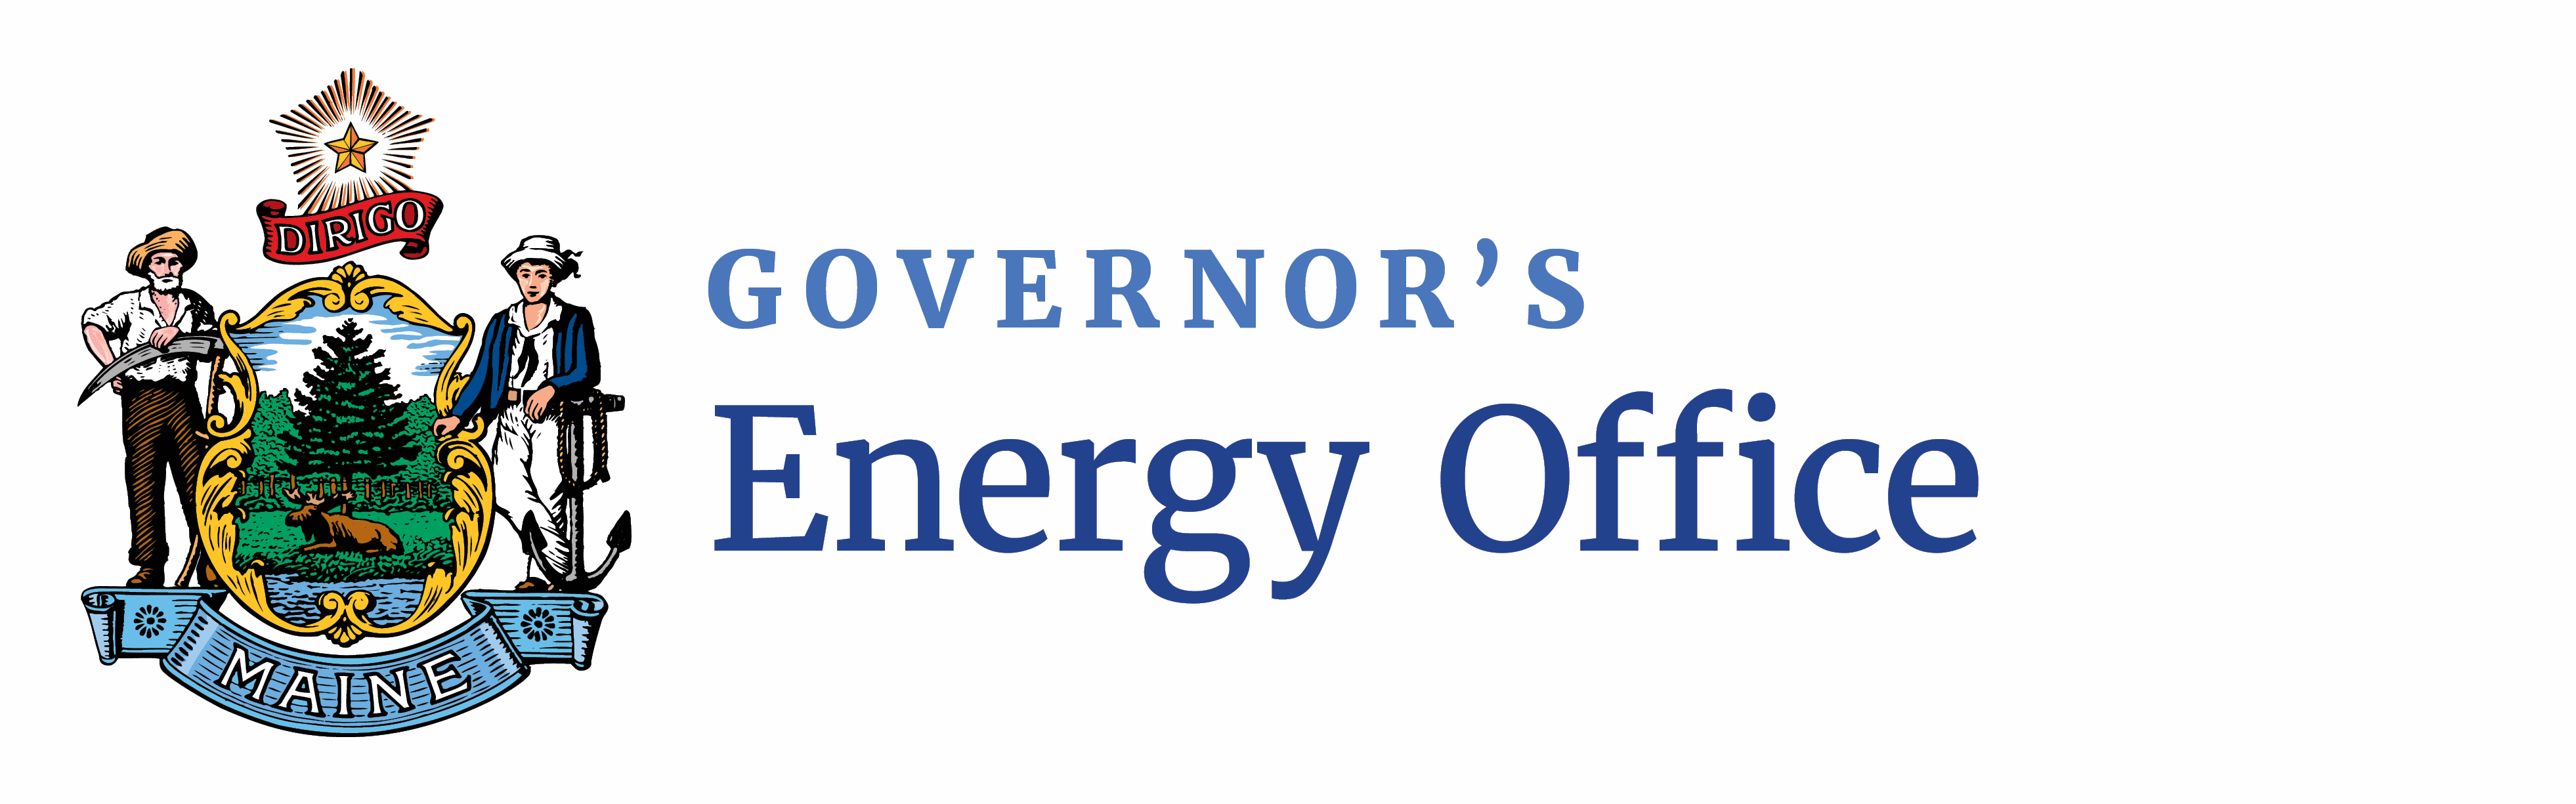 Hyperlink to Maine Governor's Energy Office website